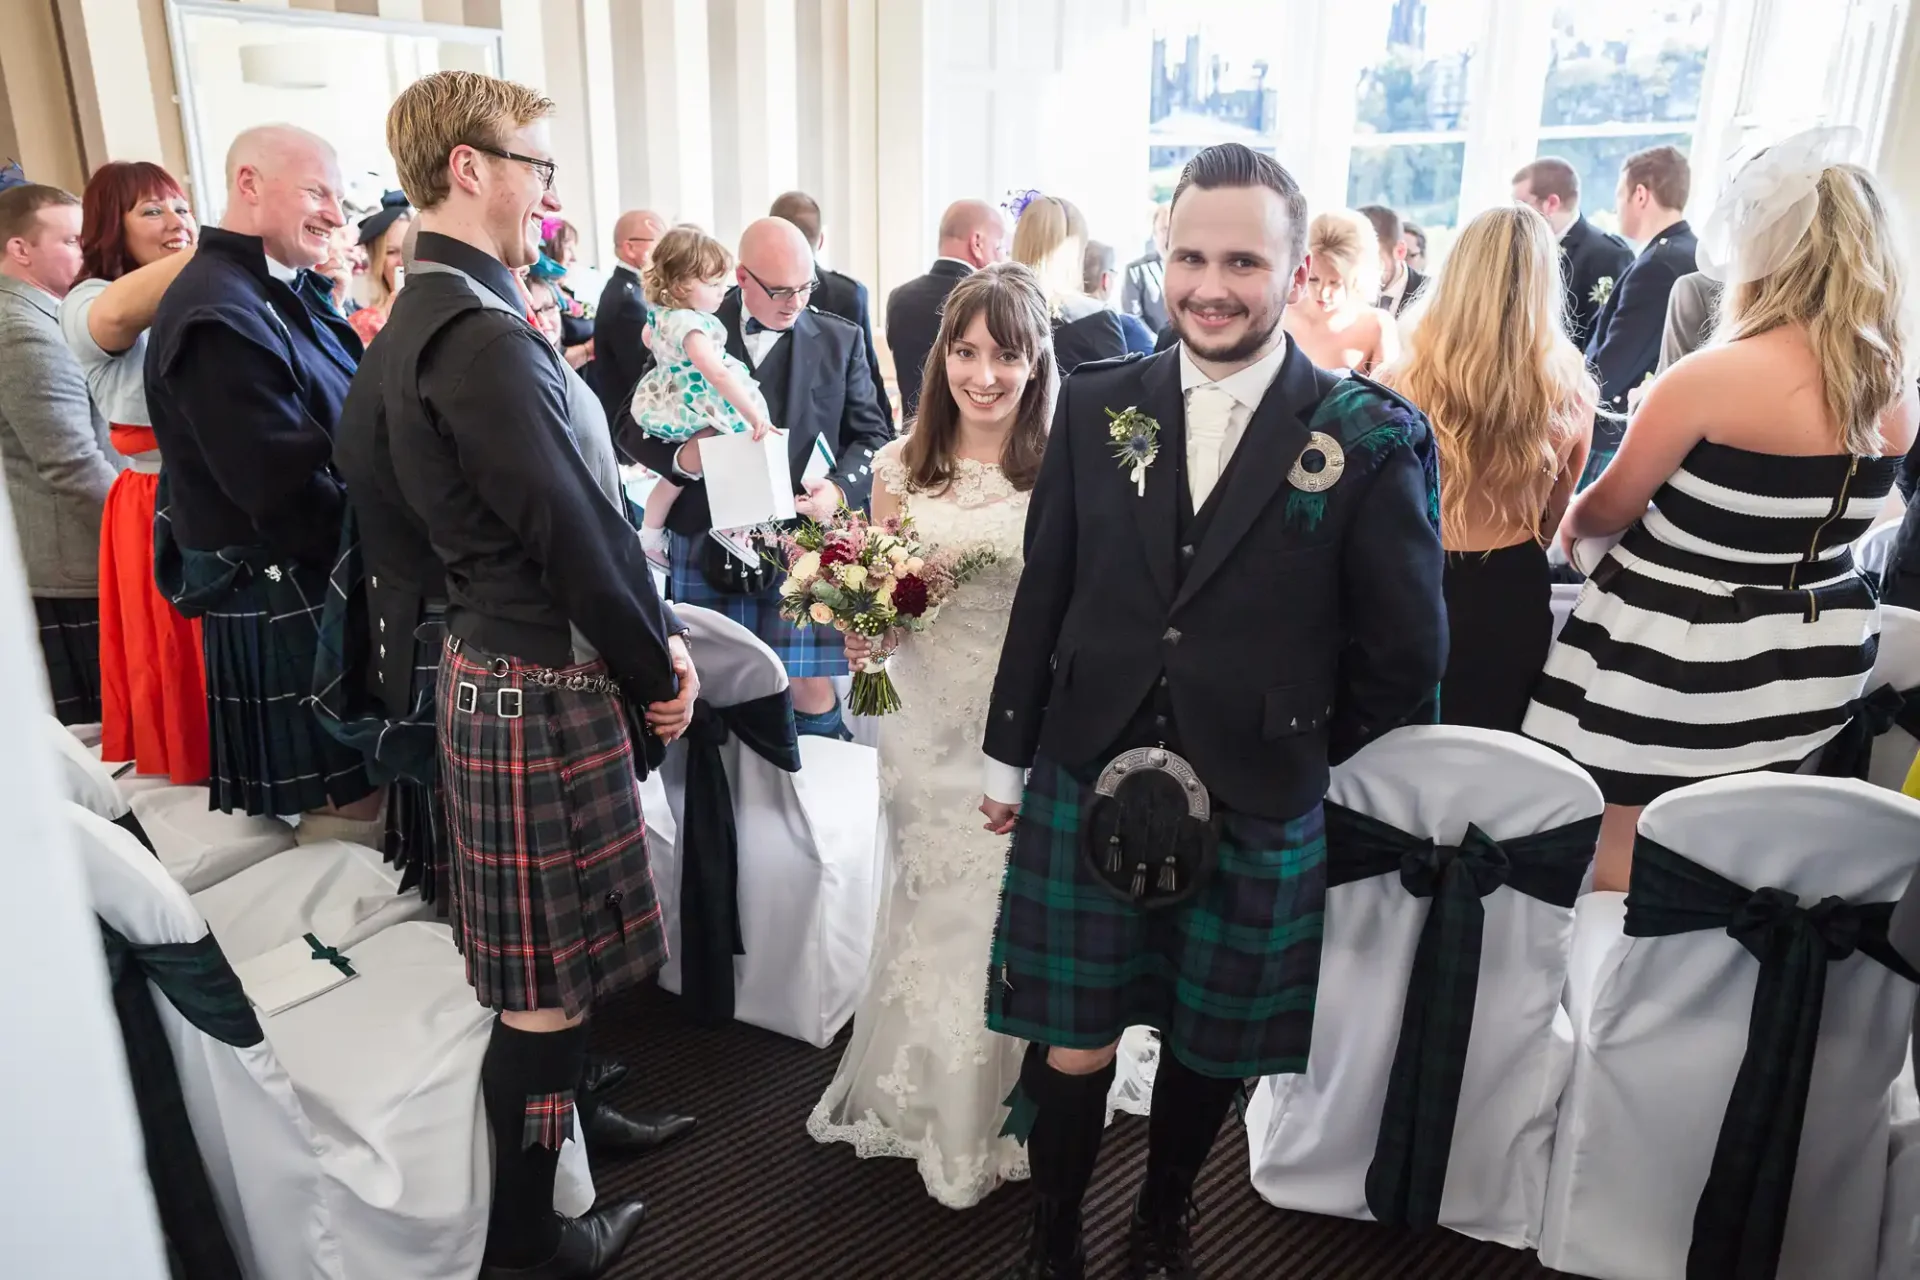 A bride and groom, both in traditional scottish attire, smiling as they walk through a crowded room of wedding guests.